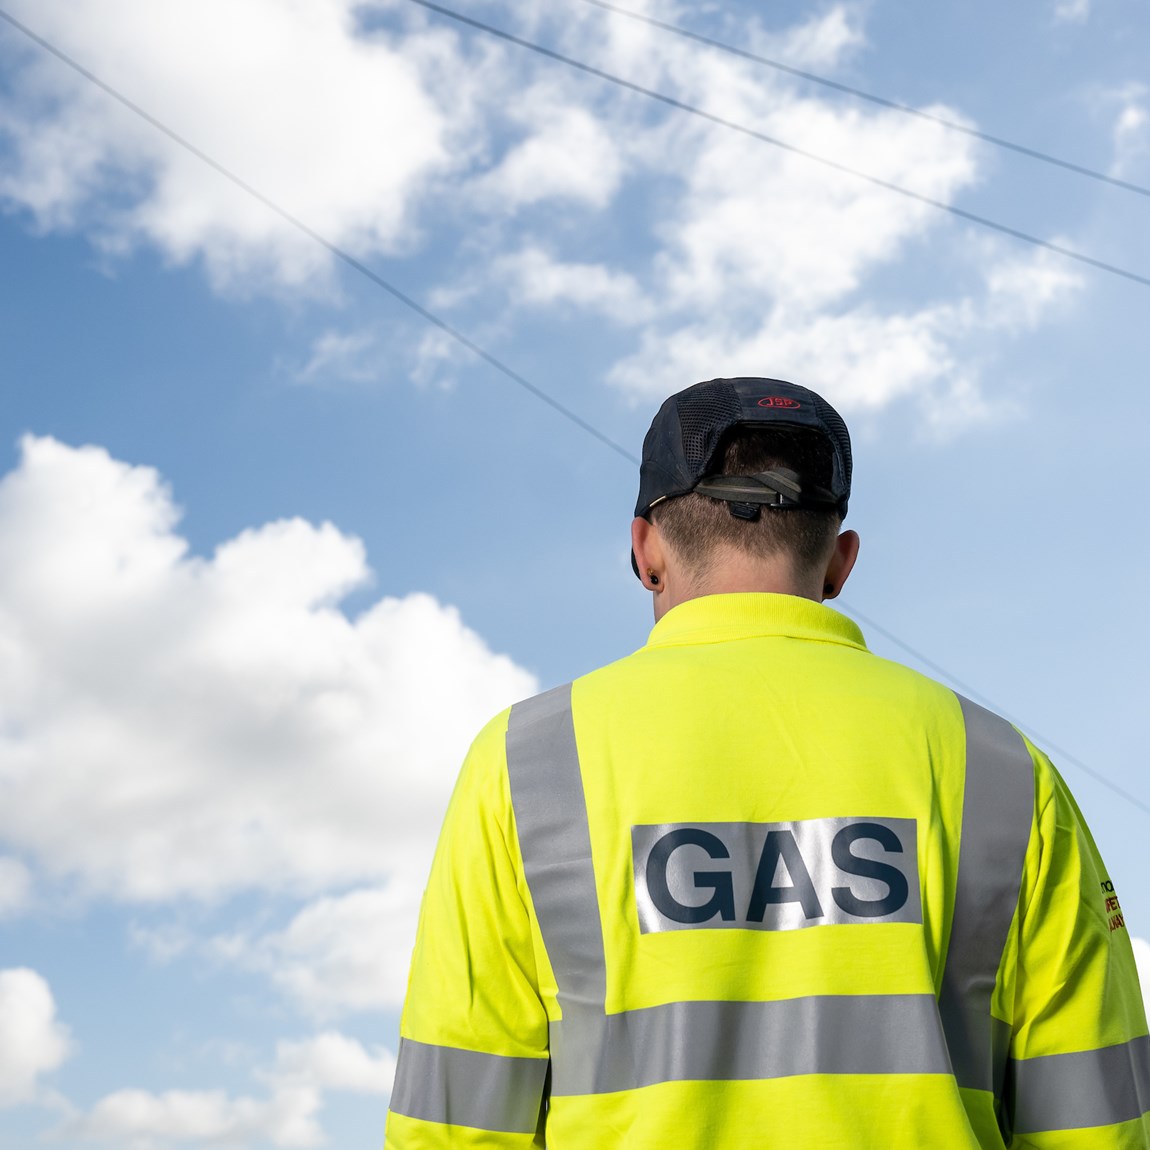 Gas pipe investment work to begin in Exeter